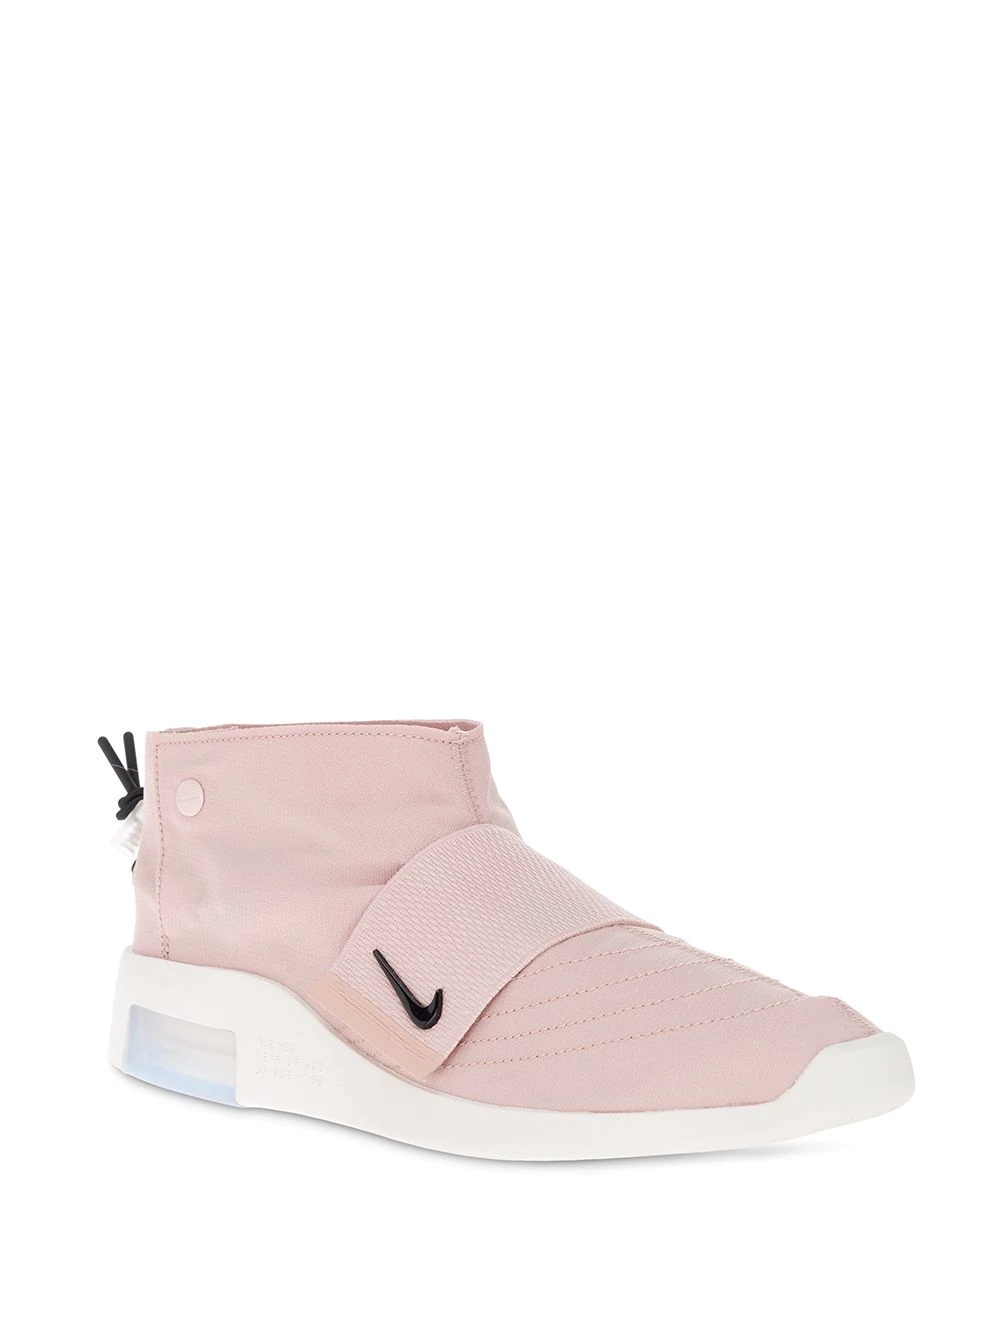 Air Fear Of God Moccasin "Particle Beige" sneakers - 2